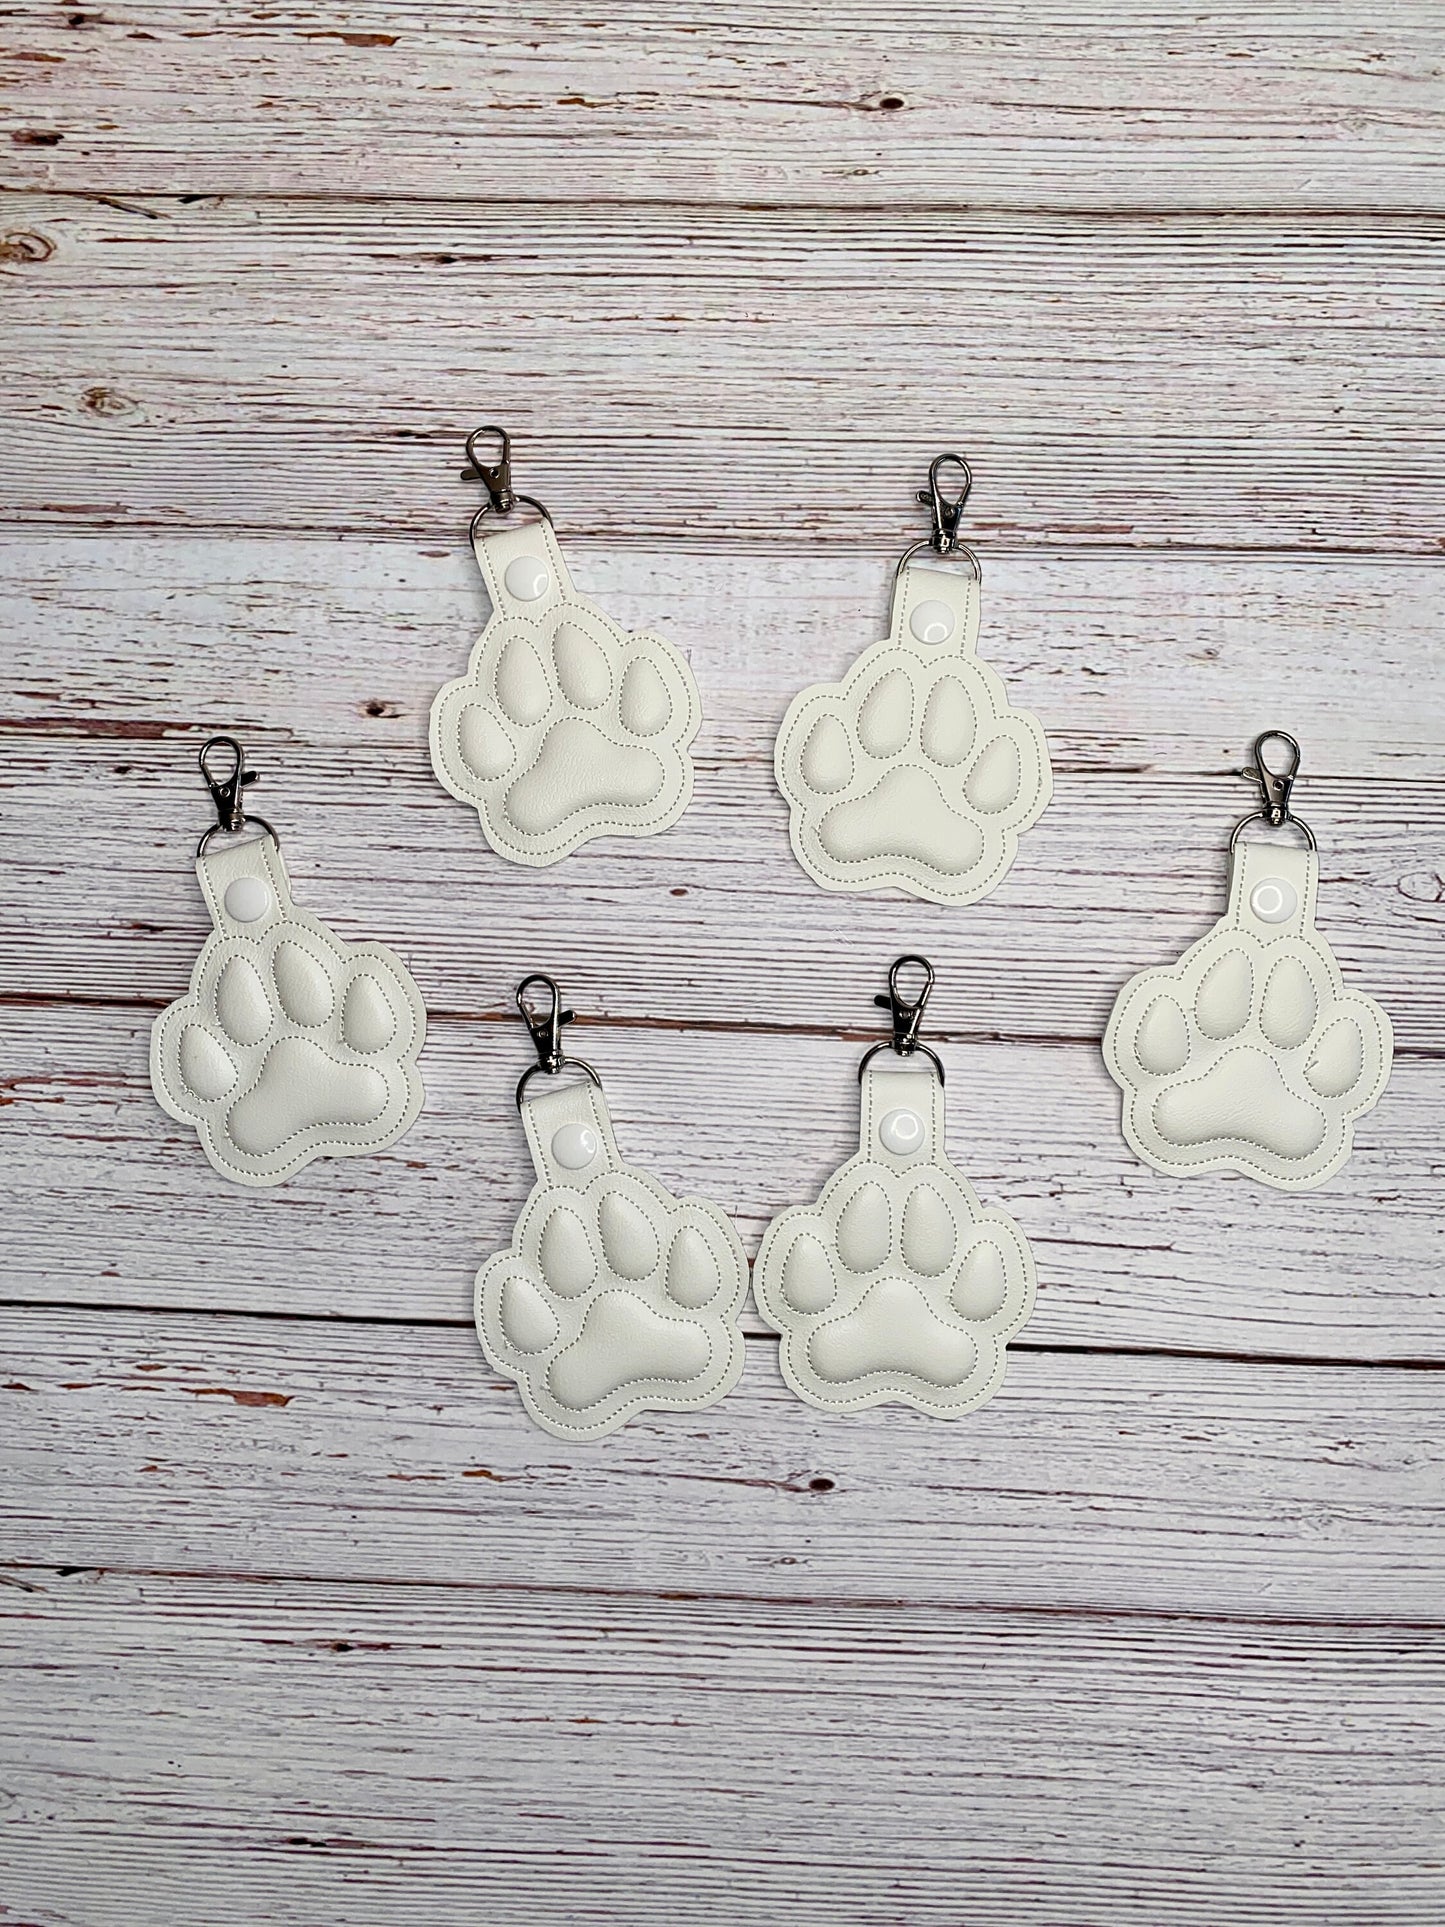 Faux Leather Puff Paw Print Key Chain, Dog Lover Gift, Custom Cat Lover Gift Wristlet Key Fob, Gift for Pet Lovers, School Spirit, Cats